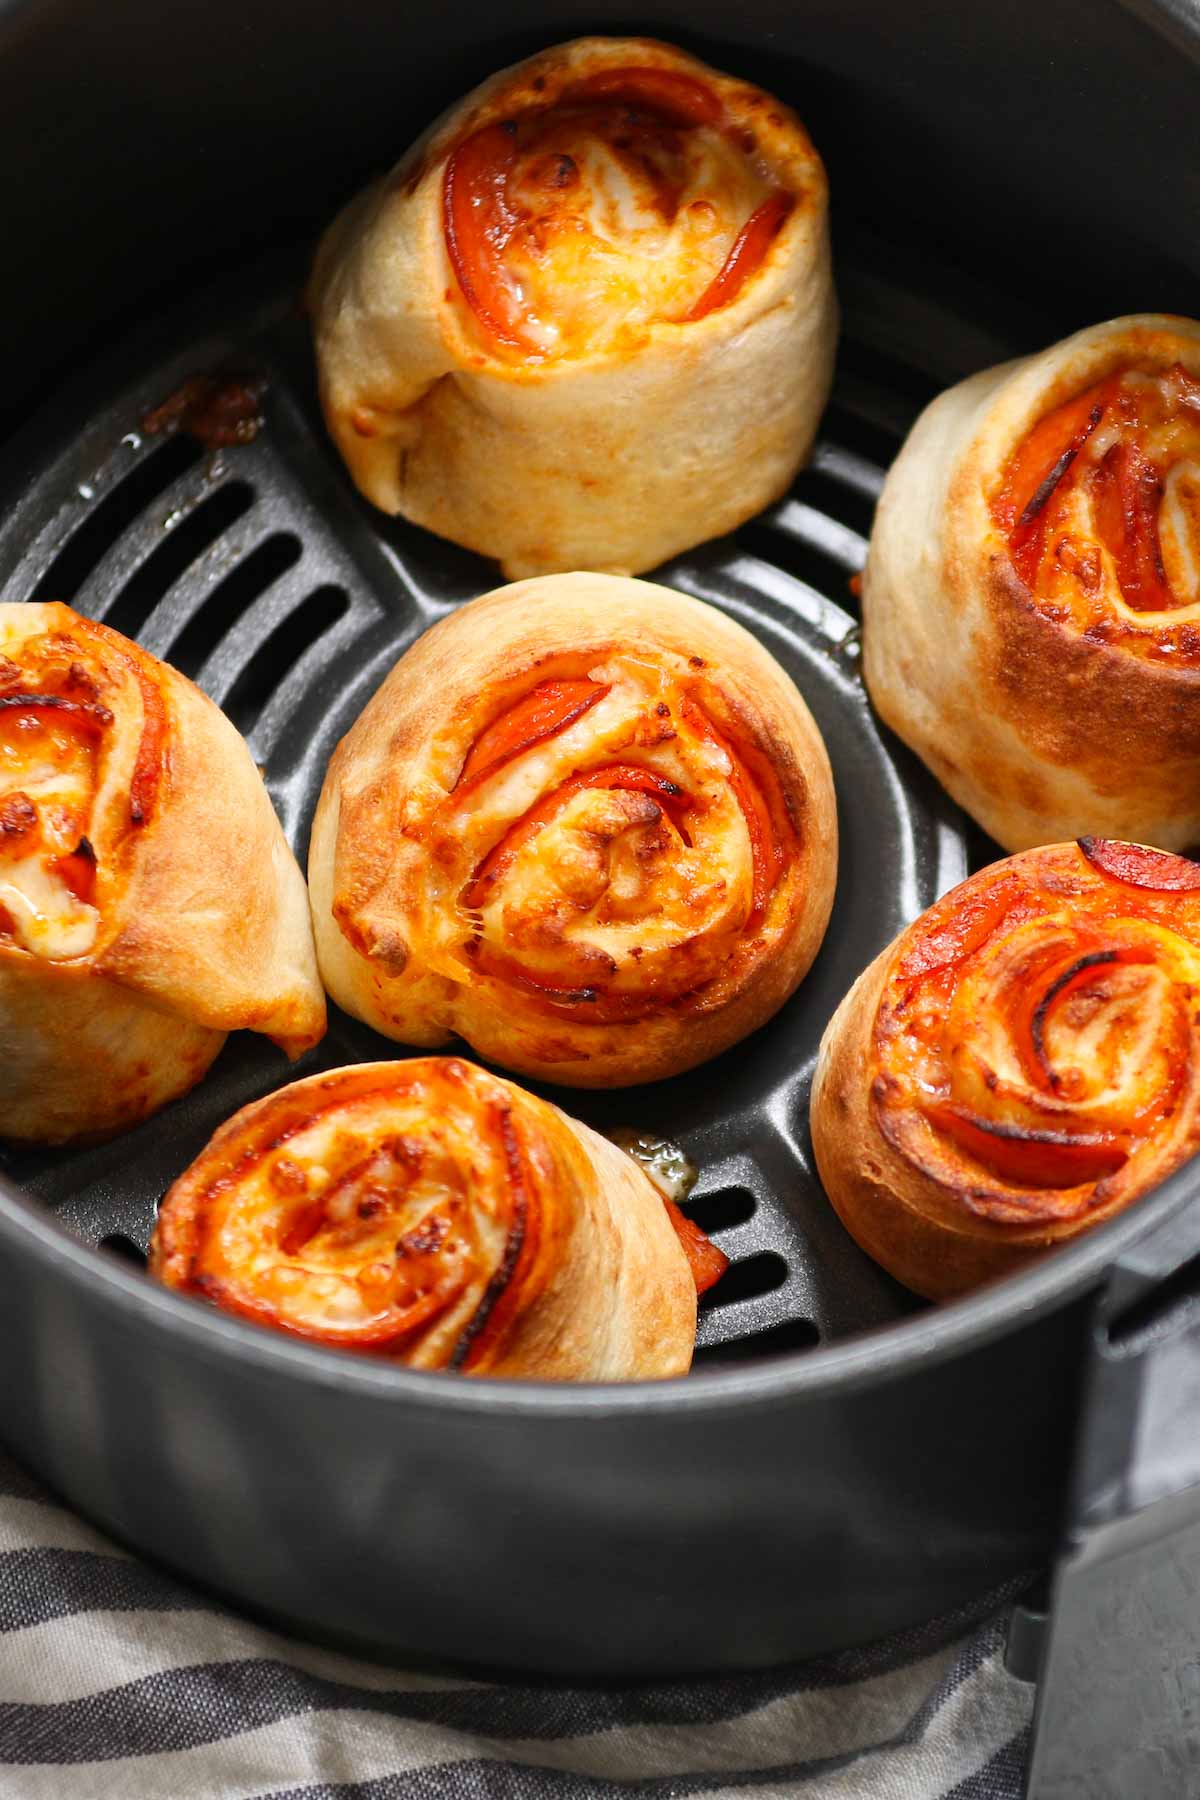 These Air Fryer Pizza Rolls have delicious pepperoni and mozzarella cheese packed in pizza pockets – an instant crowd-pleaser great for appetizer or snack. You can easily make these bite-sized mini pizzas at home from scratch in under 10 minutes. We’ve also included instructions on how to air fry frozen pizza puffs straight from the freezer. 